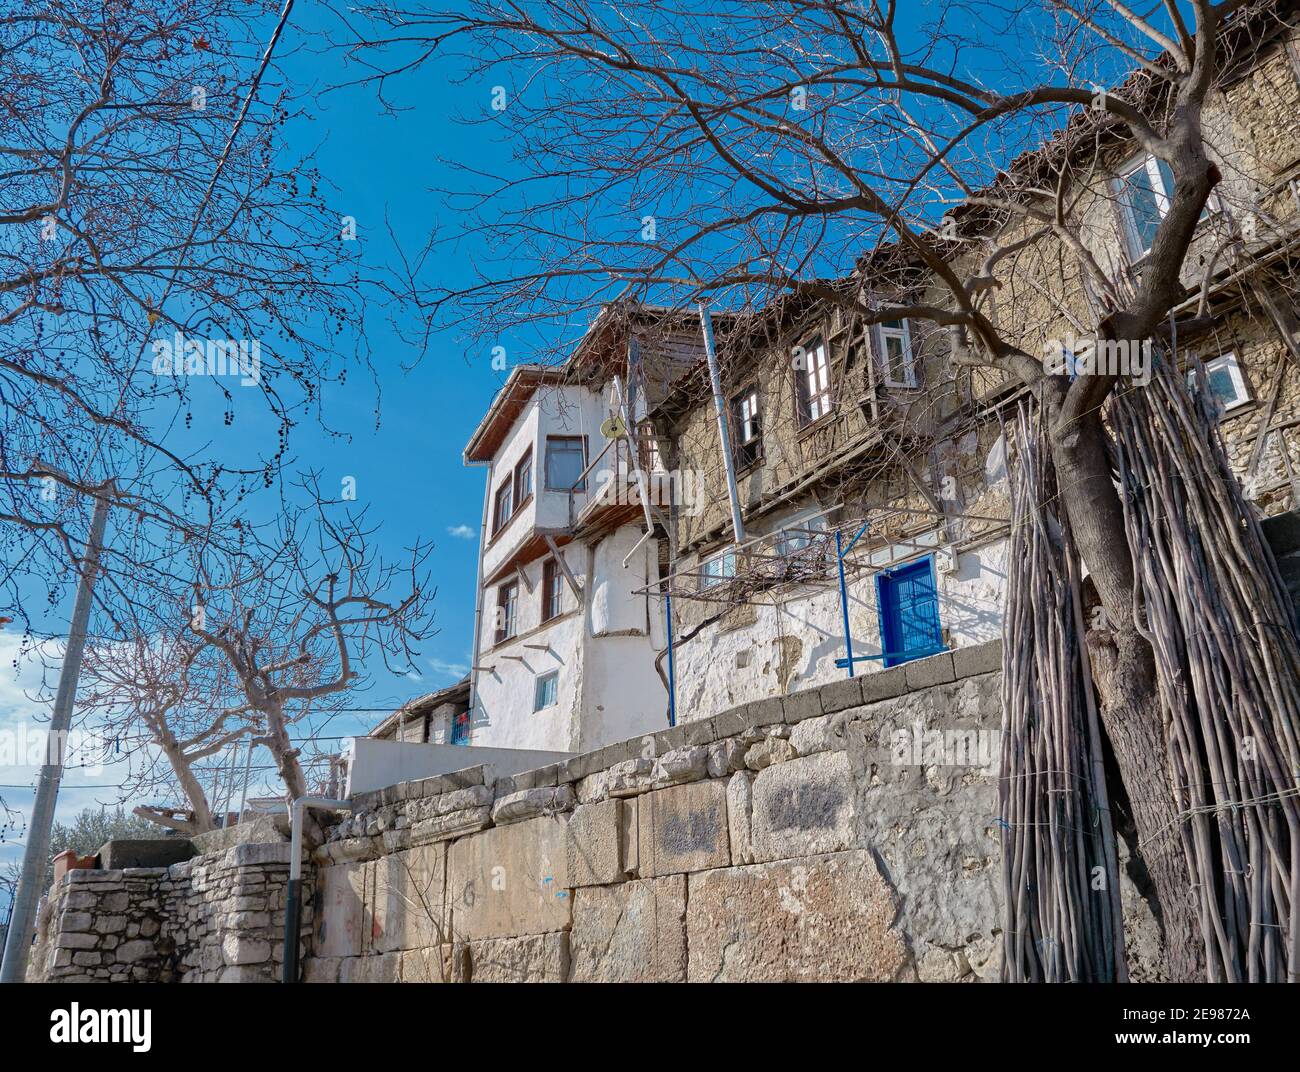 Old town Golyazi. Ancient and magnificent house in front of the lake of uluabat during sunny day. House made of stone and mud as old style. Blue door Stock Photo